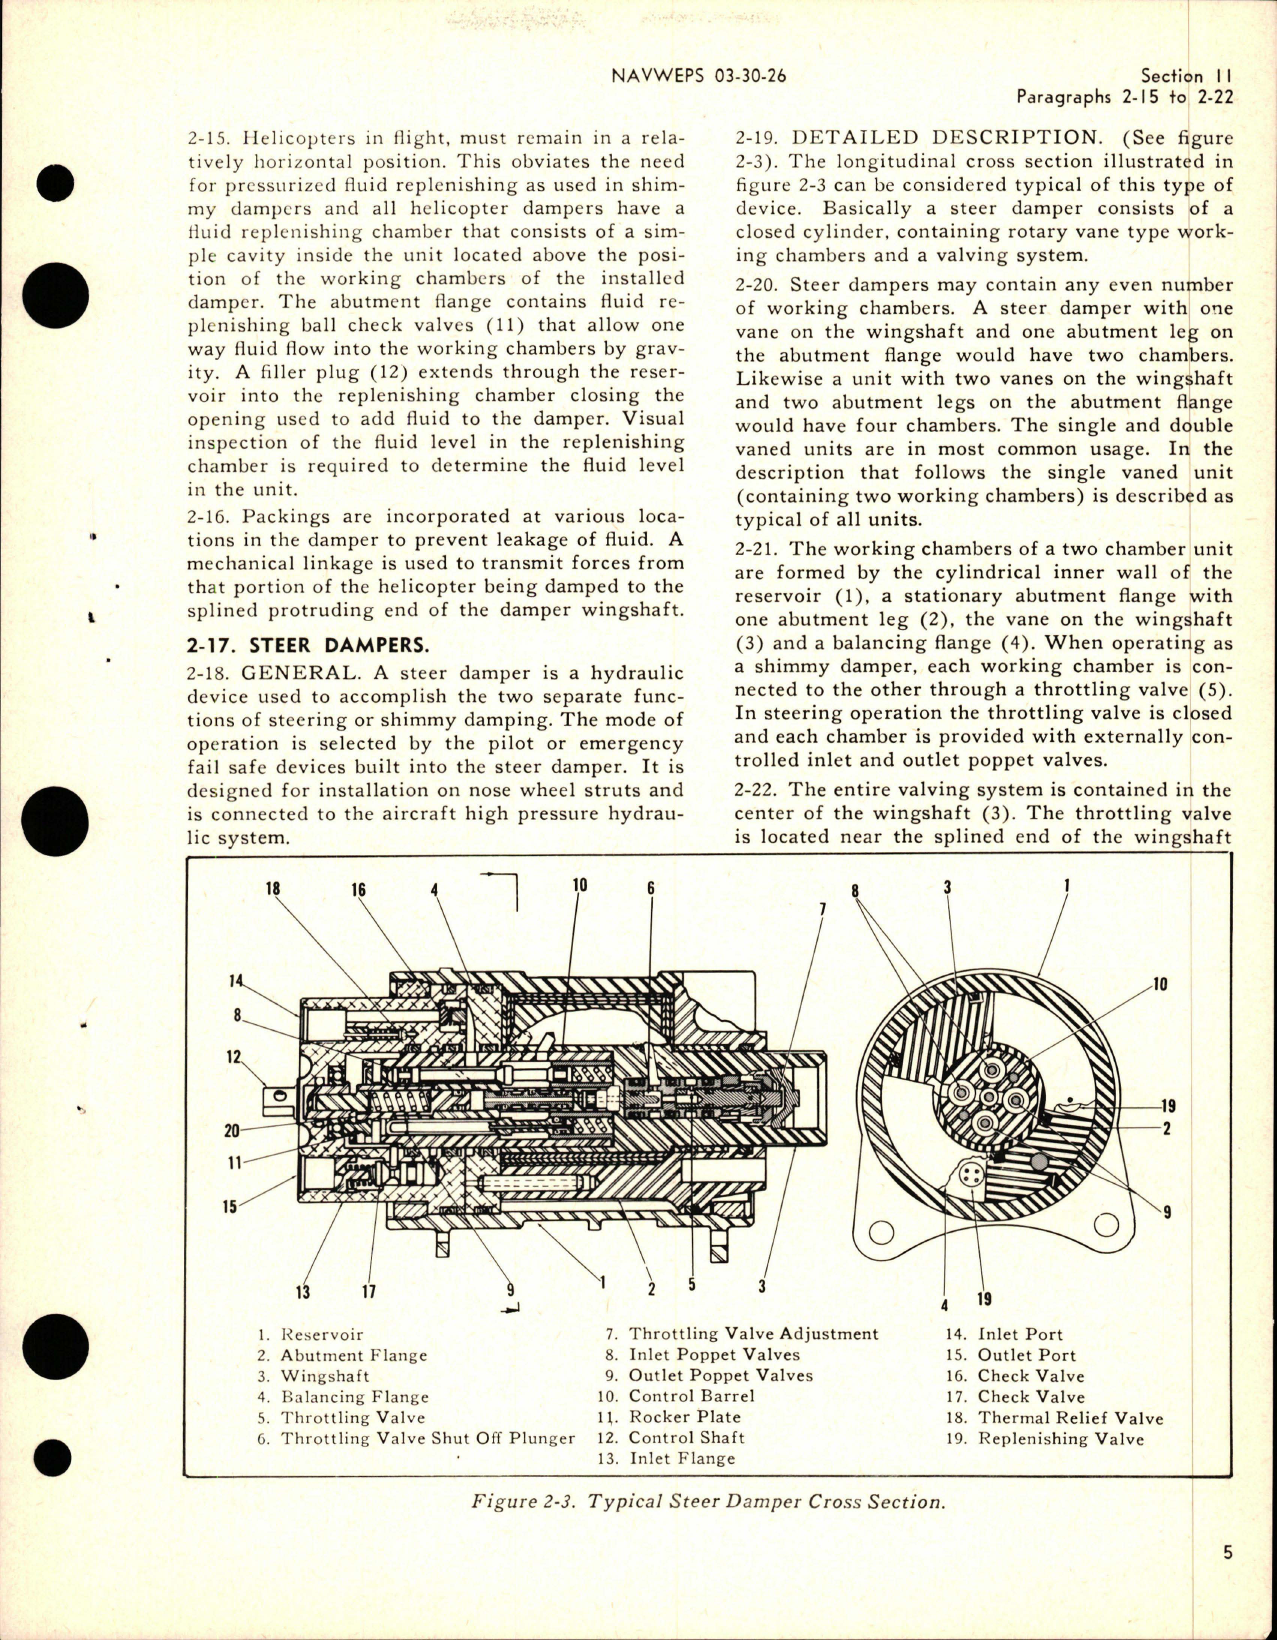 Sample page 9 from AirCorps Library document: Operation, Service and Overhaul Instructions with Illustrated Parts for Shimmy Dampers - Helicopter Dampers - Steer Dampers